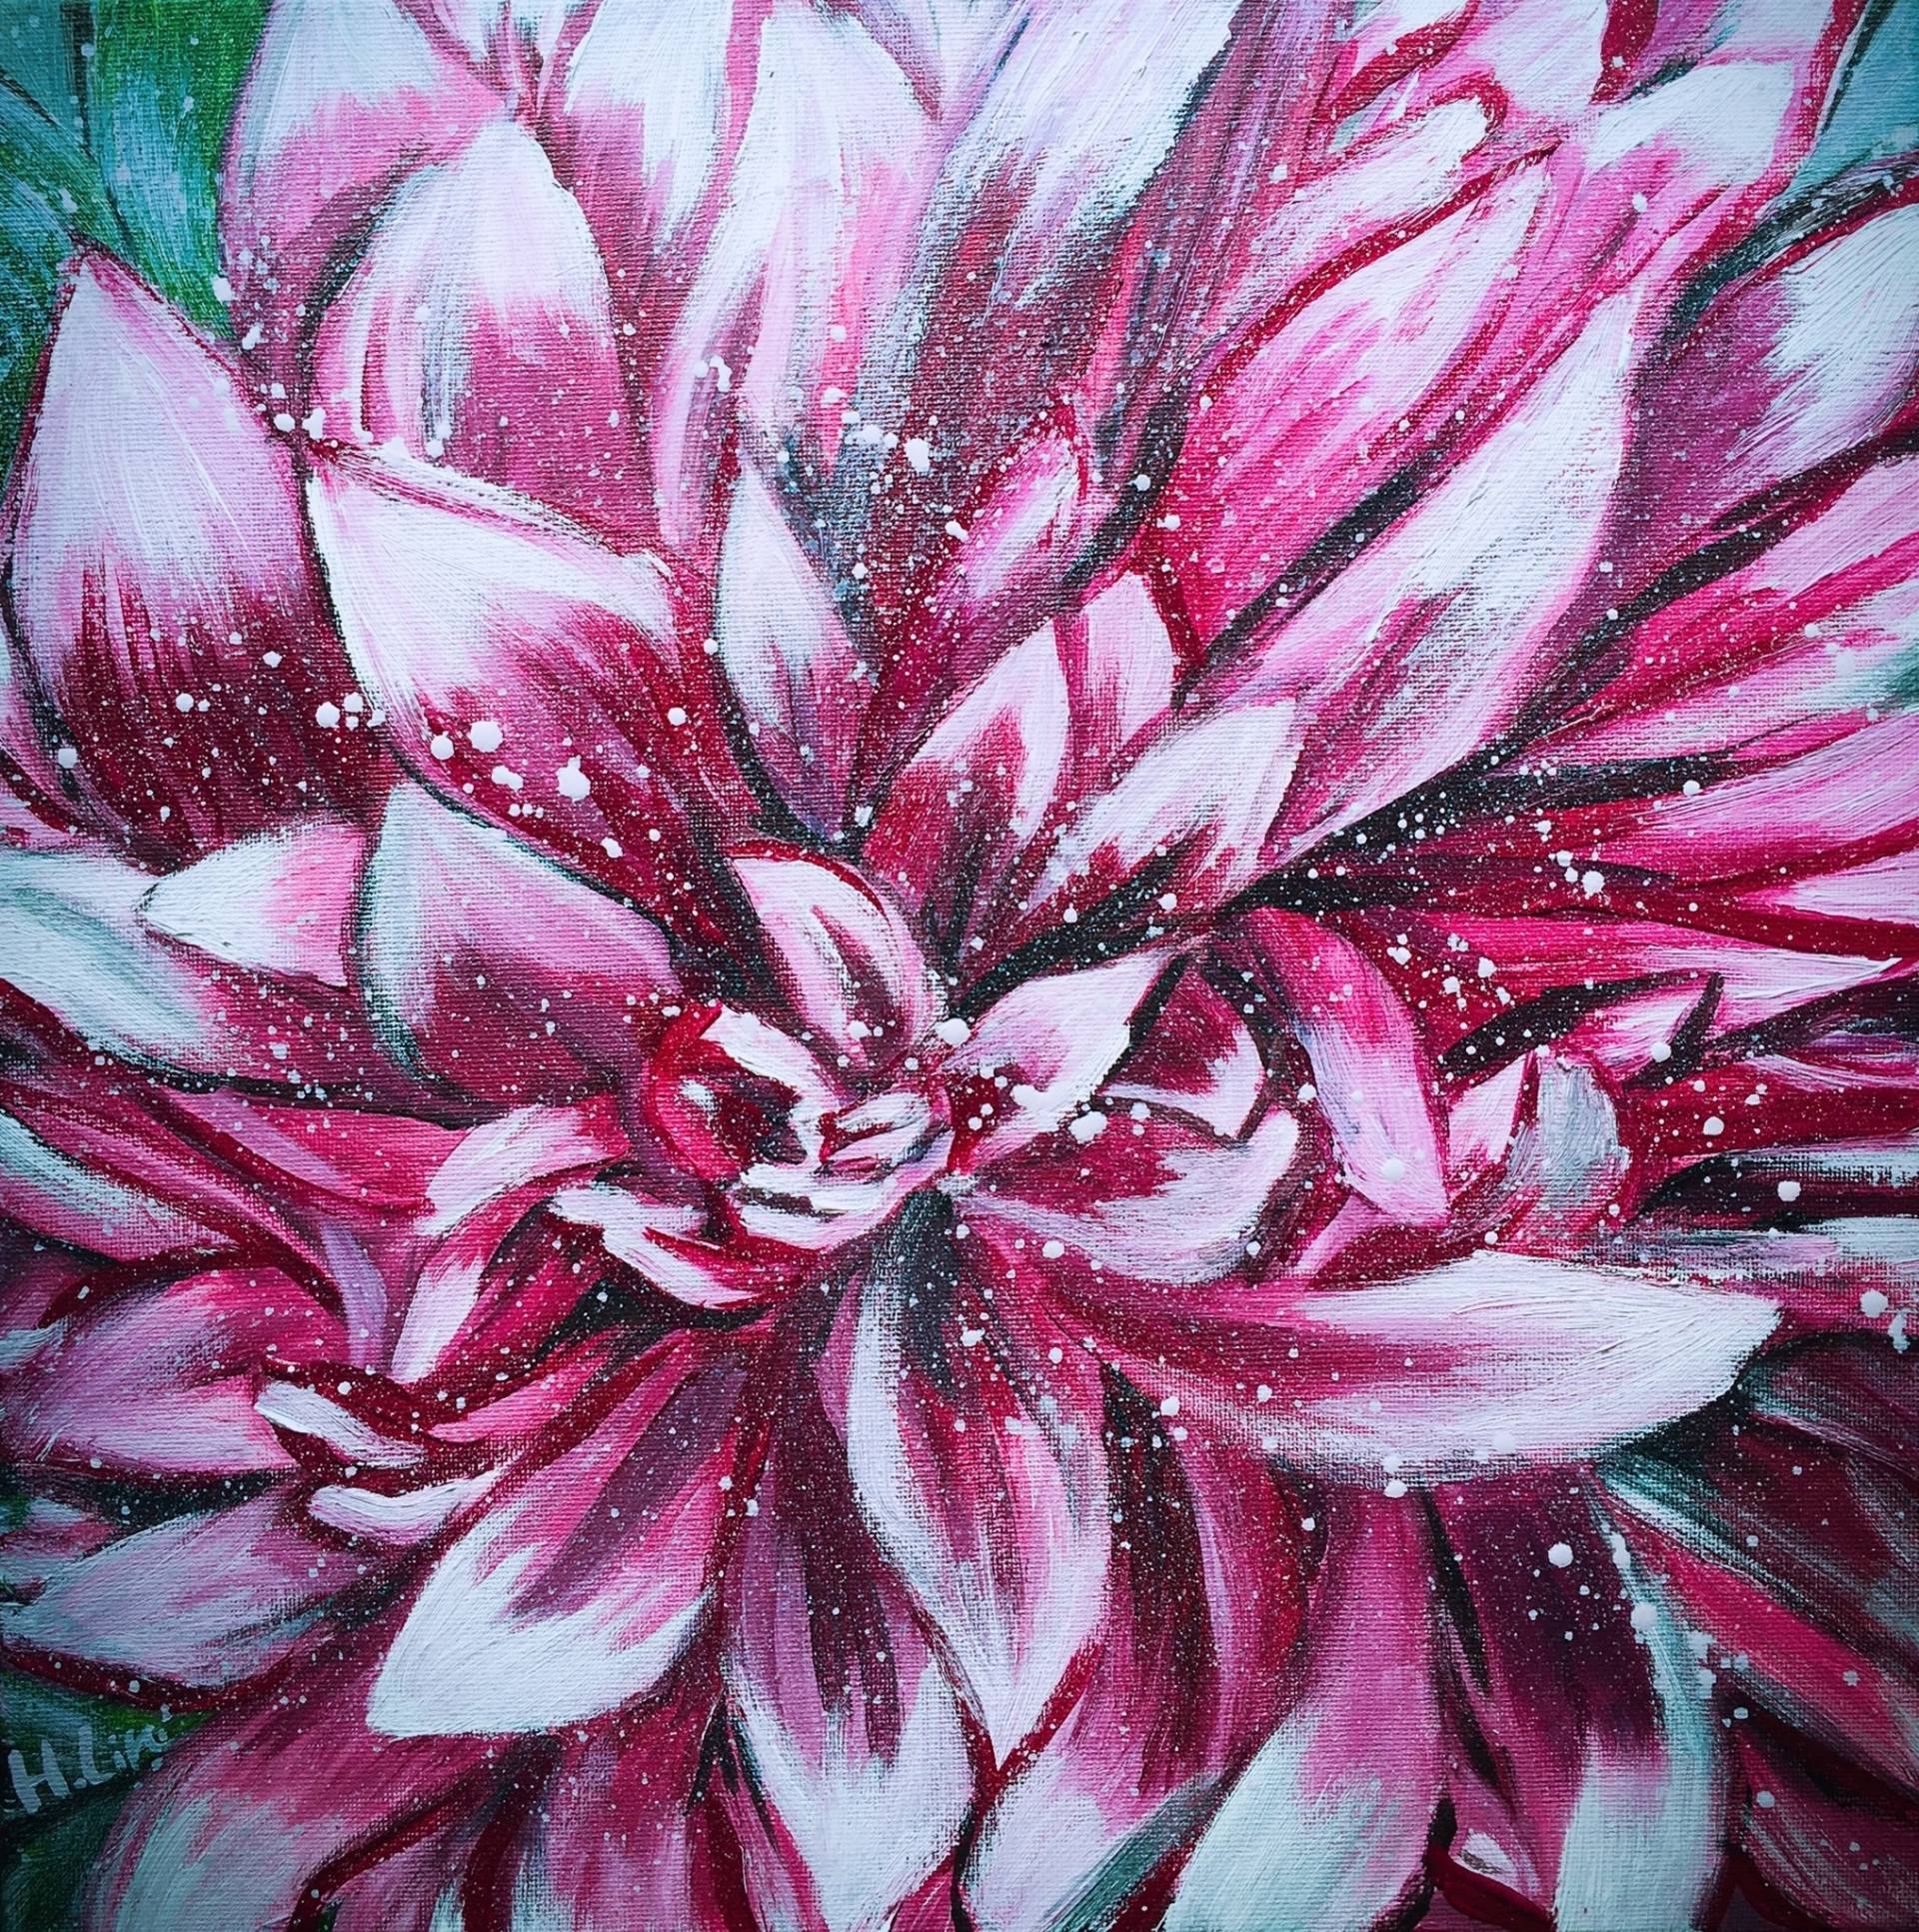 Saatchi Art: BLOOMING -Dahlia Painting by HSIN LIN